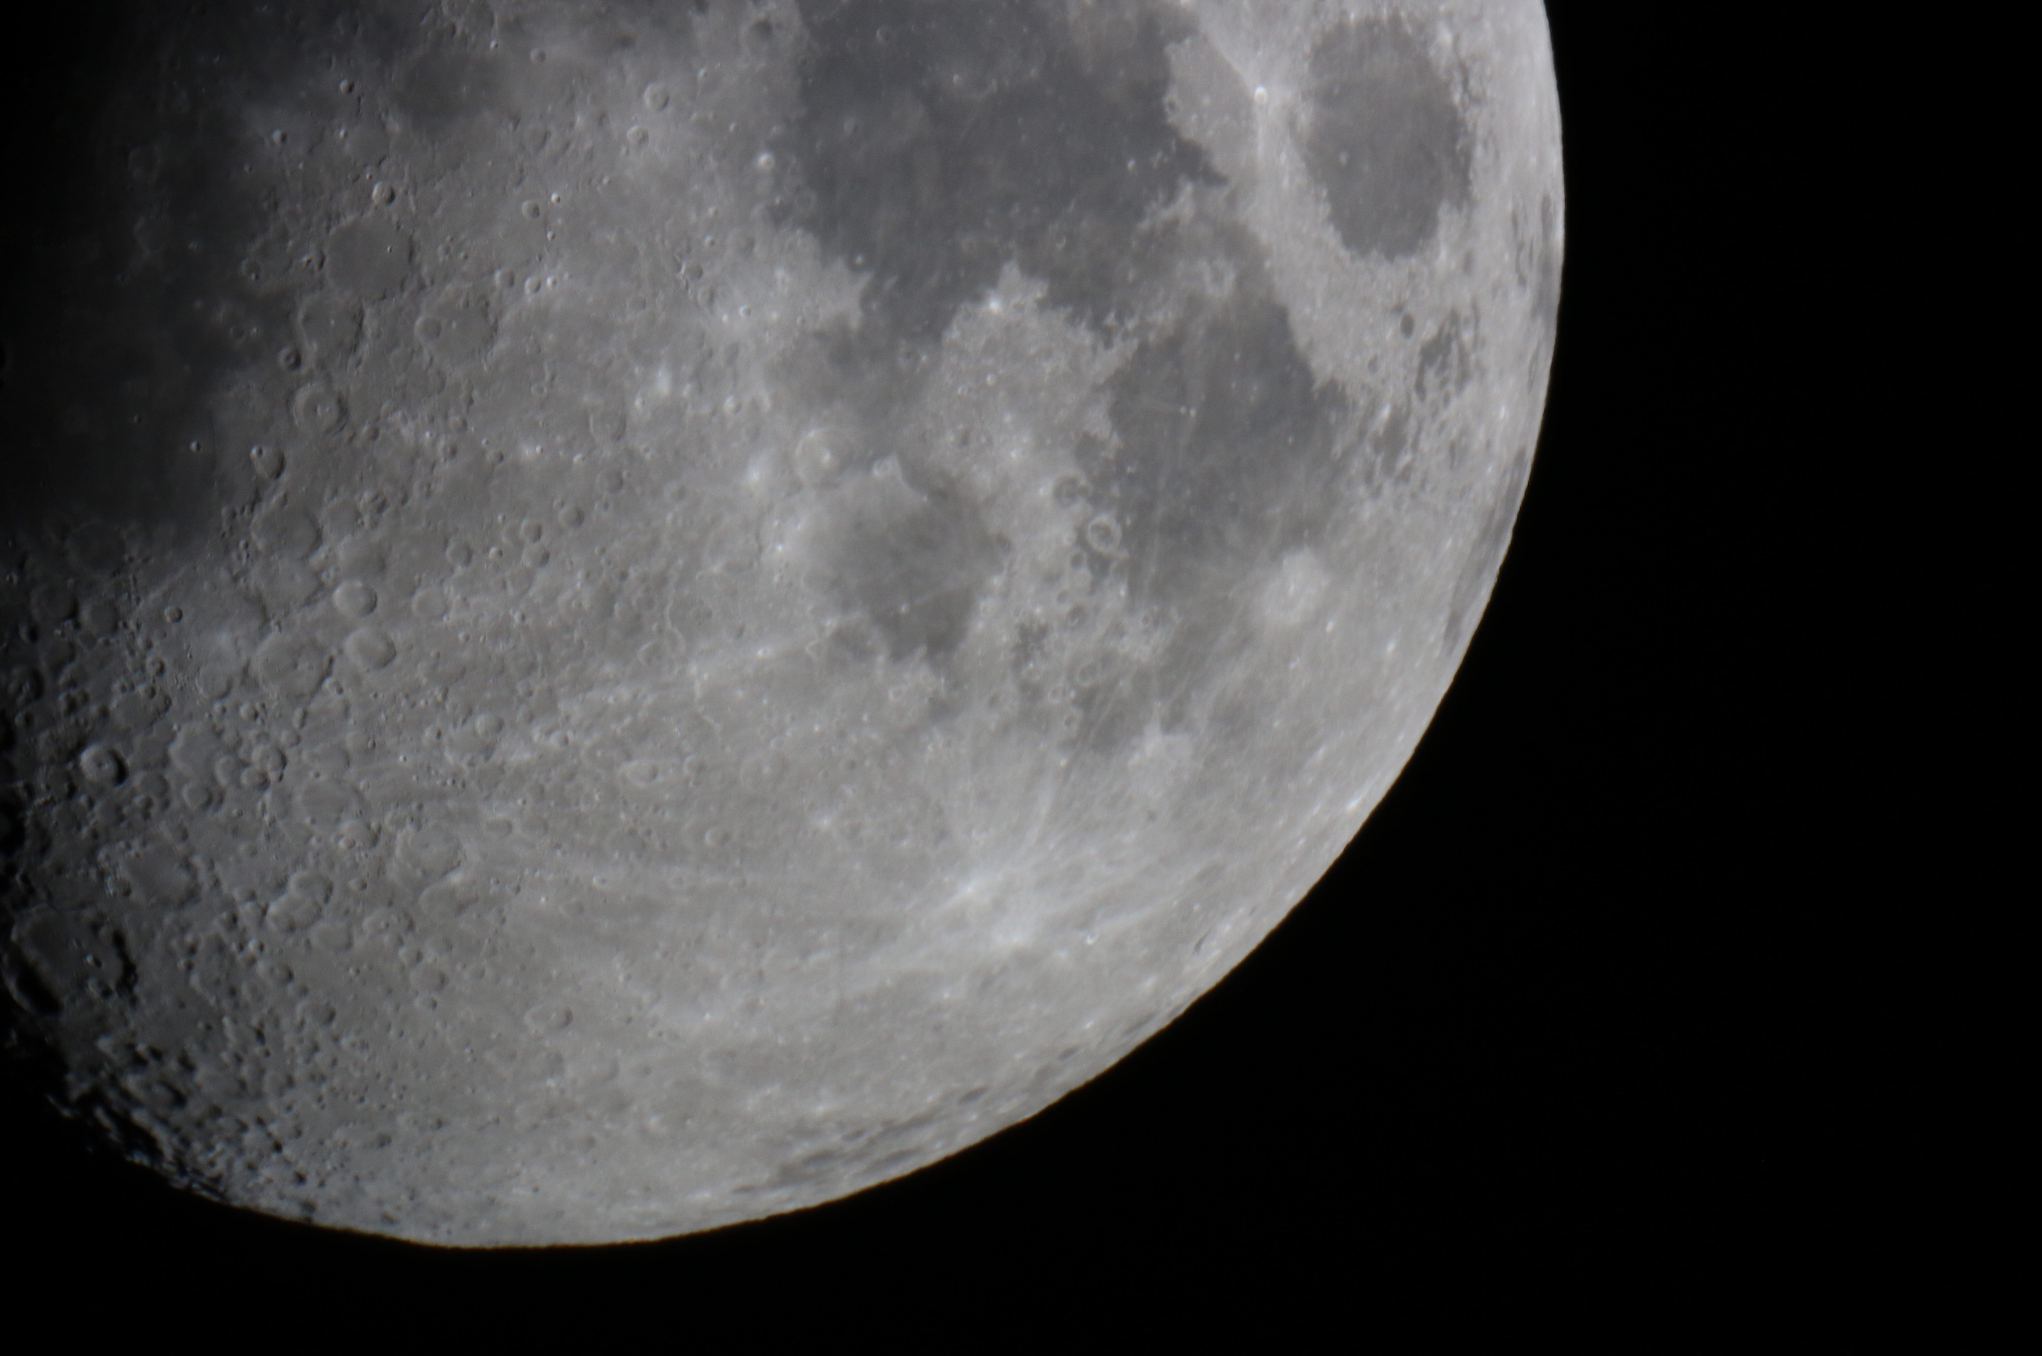 Image of the Moon from Colgate's campus.